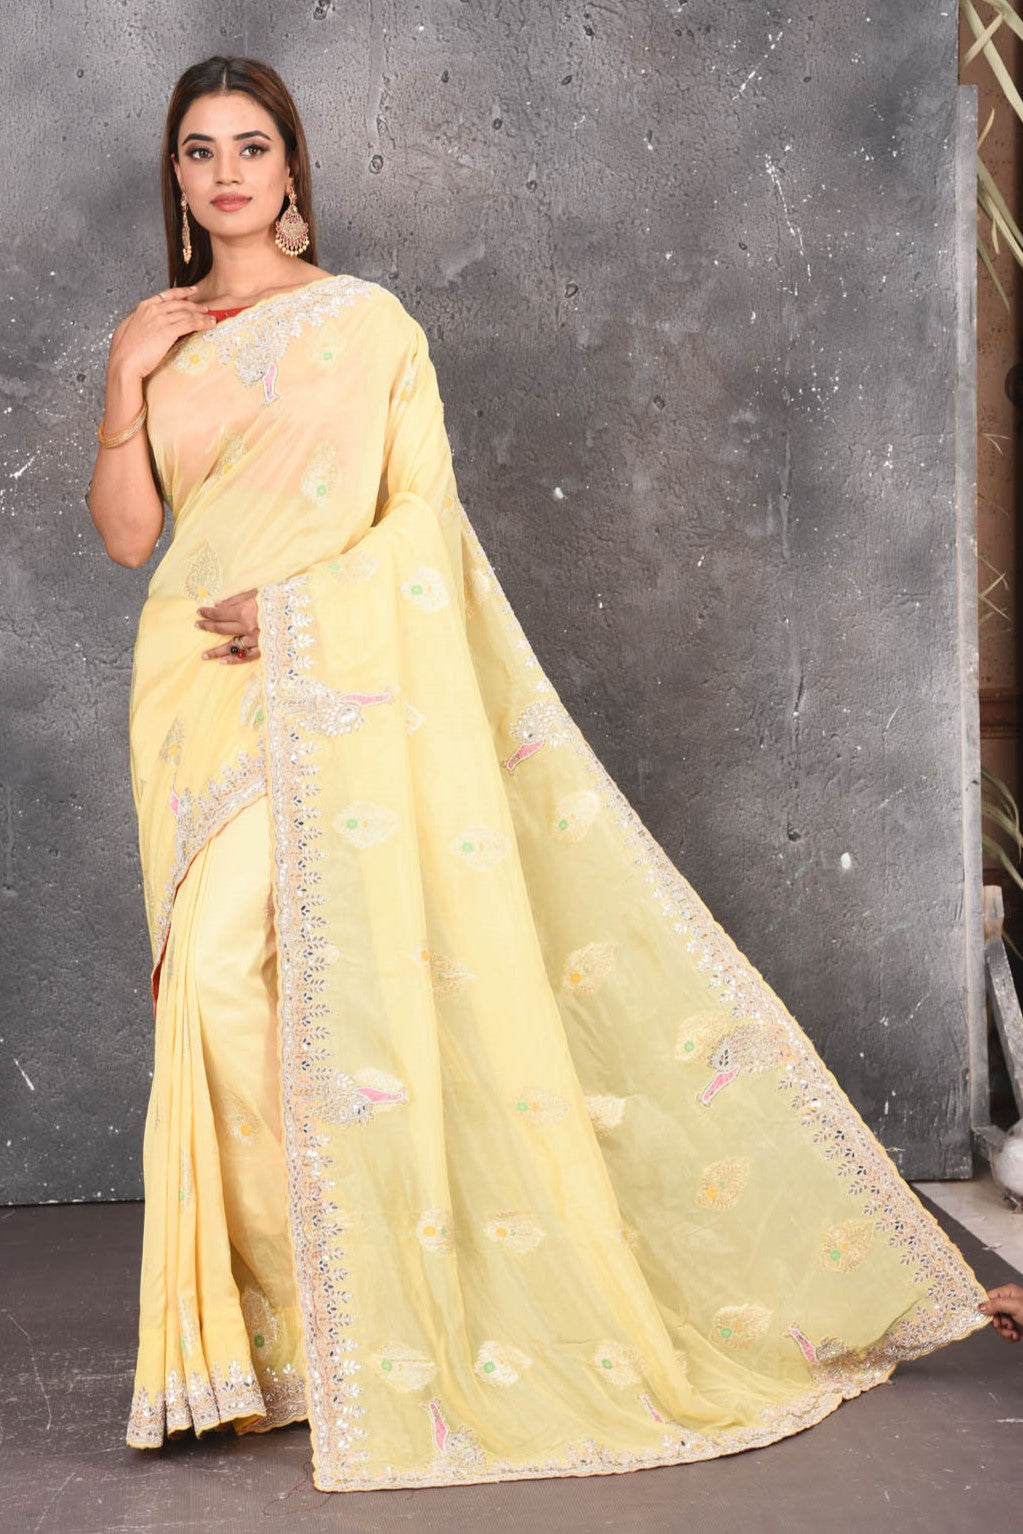 Buy this elegant lemon yellow gota patti mirror embroidered soft organza silk designer saree online in USA with beautiful peacock design threadwork, gota patti leaves and dazzling cut dana and mirror work details. Mirror bootis are scattered all over the saree to match the brightness of the happy look. Add this designer sari to your collection from Pure Elegance Indian fashion store in USA.-Full view.